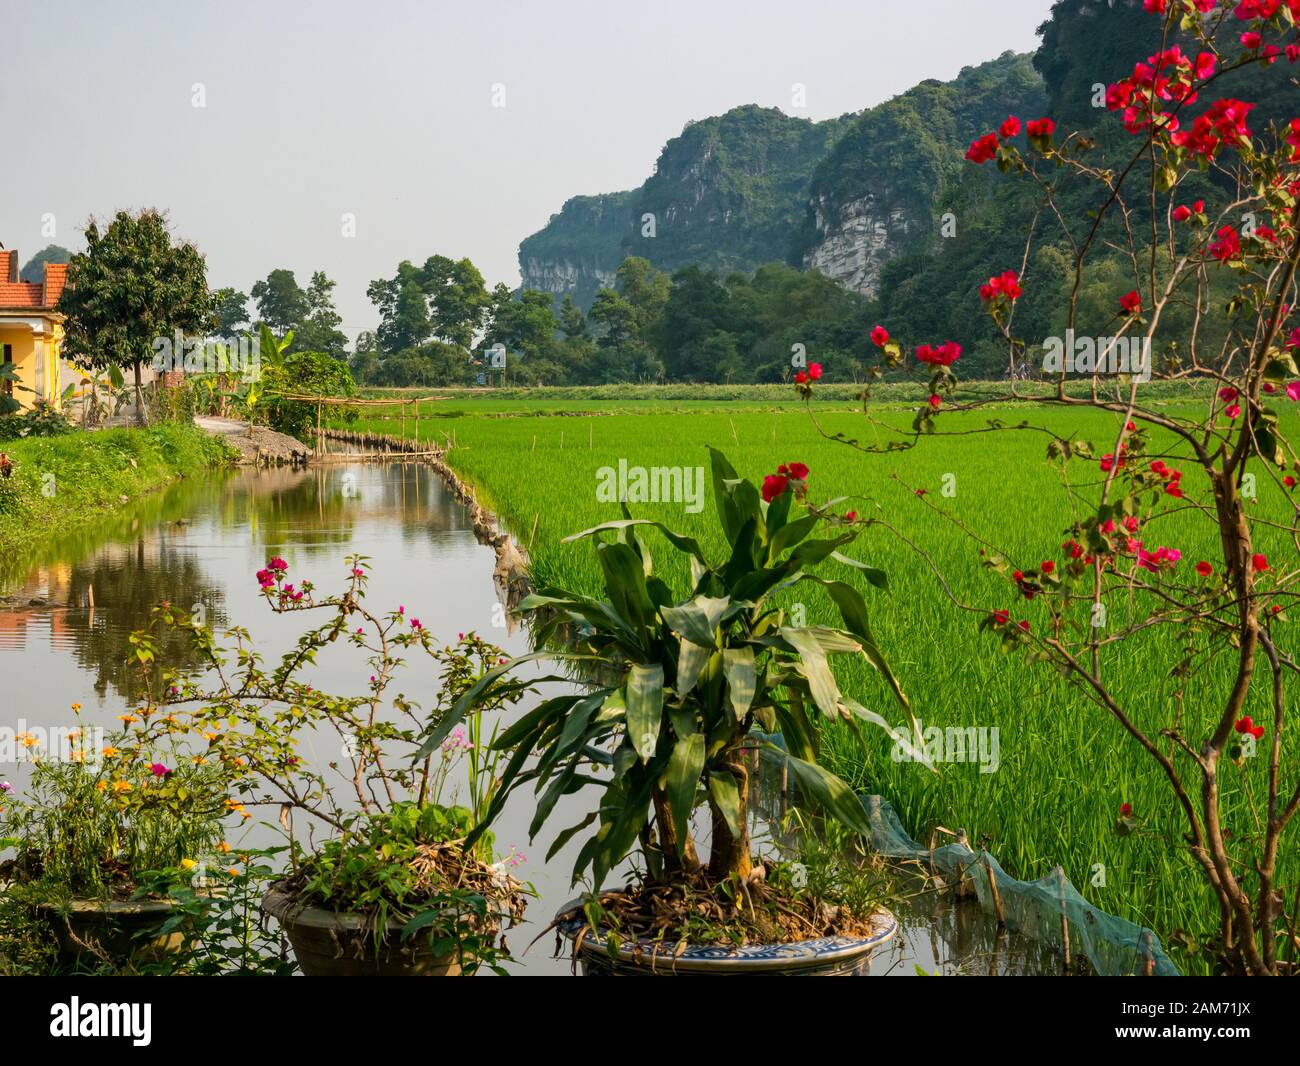 Rice paddy field with irrigation channel and limestone karst mountains, Tam Coc, Ninh Binh, Vietnam, Asia Stock Photo